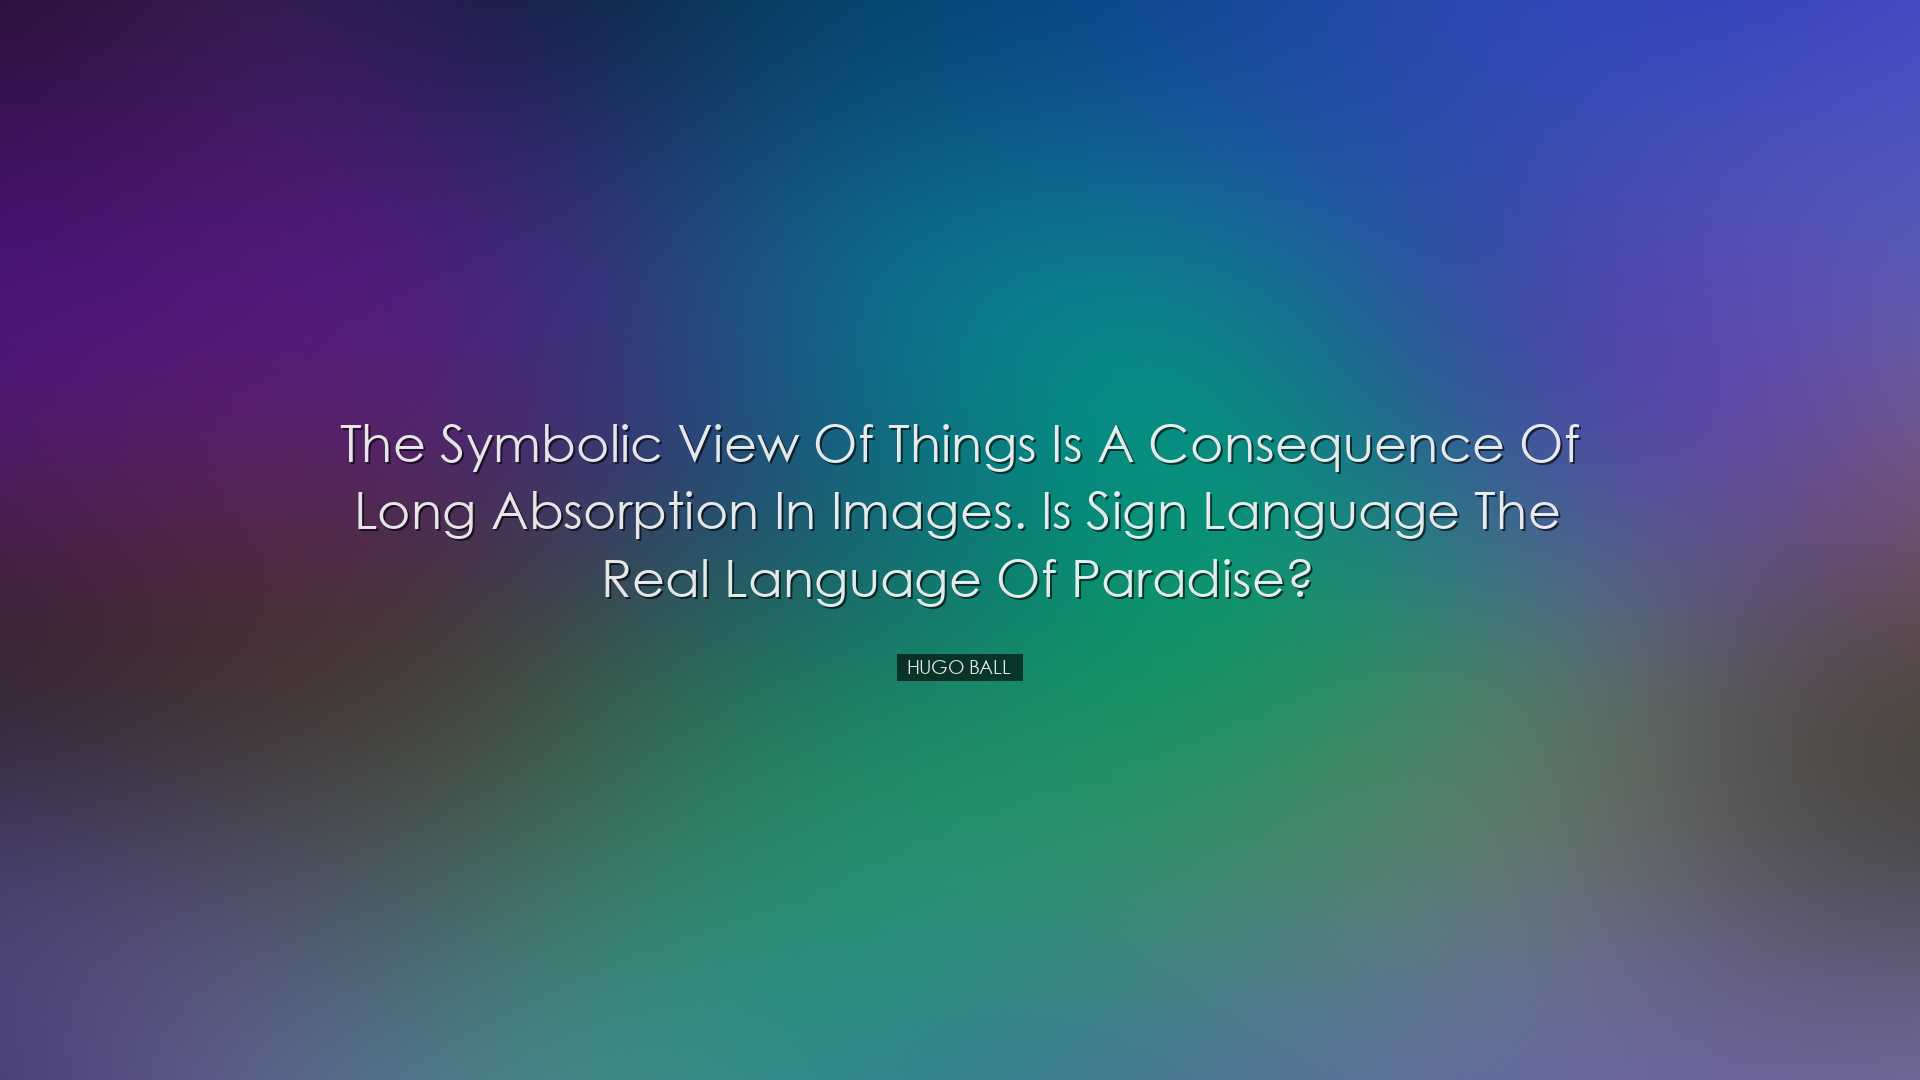 The symbolic view of things is a consequence of long absorption in